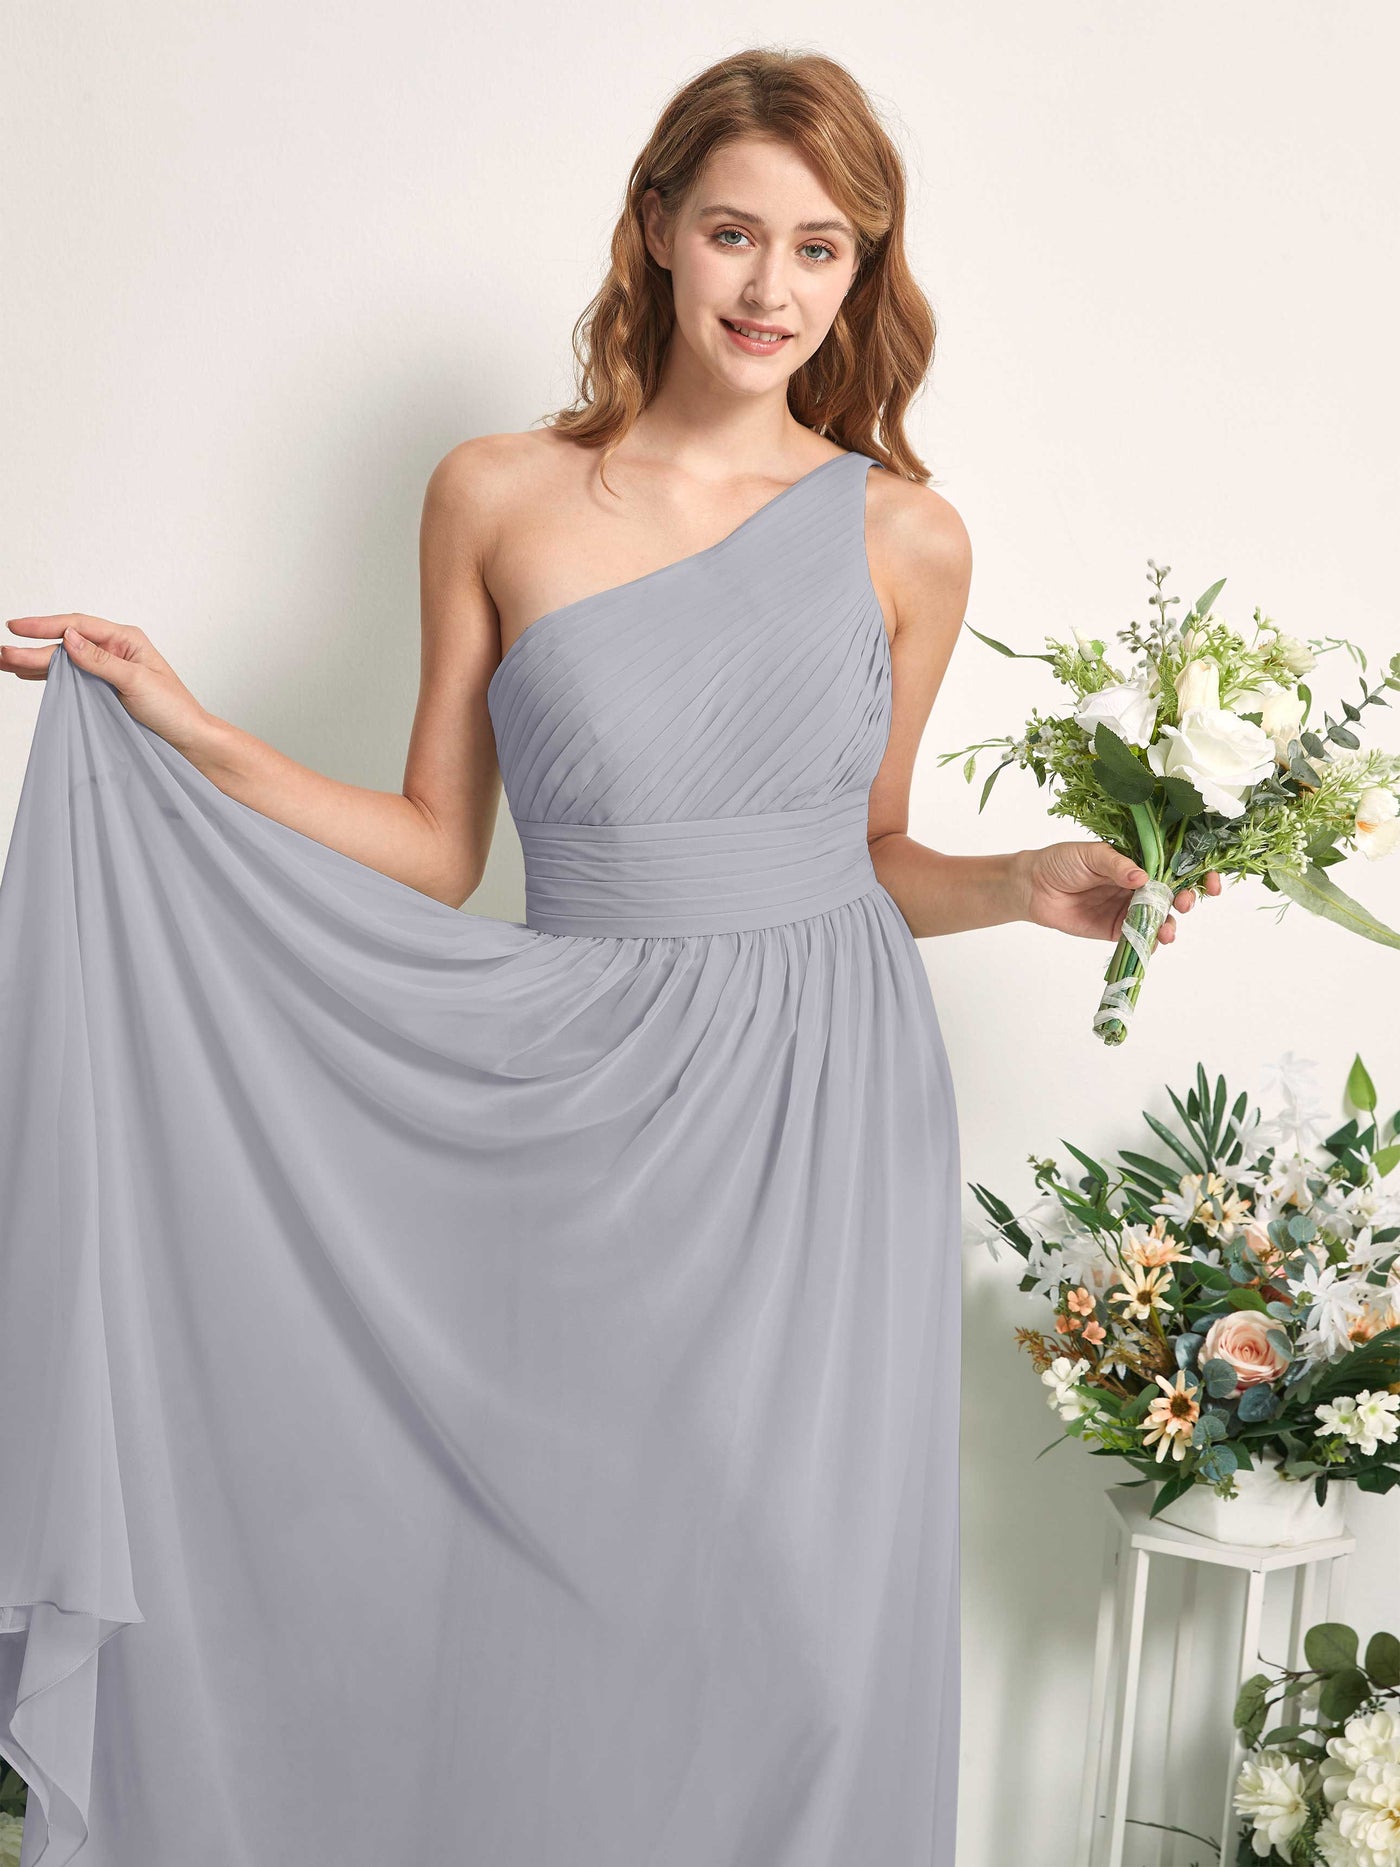 Bridesmaid Dress A-line Chiffon One Shoulder Full Length Sleeveless Wedding Party Dress - Dusty Lavender (81226703)#color_dusty-lavender